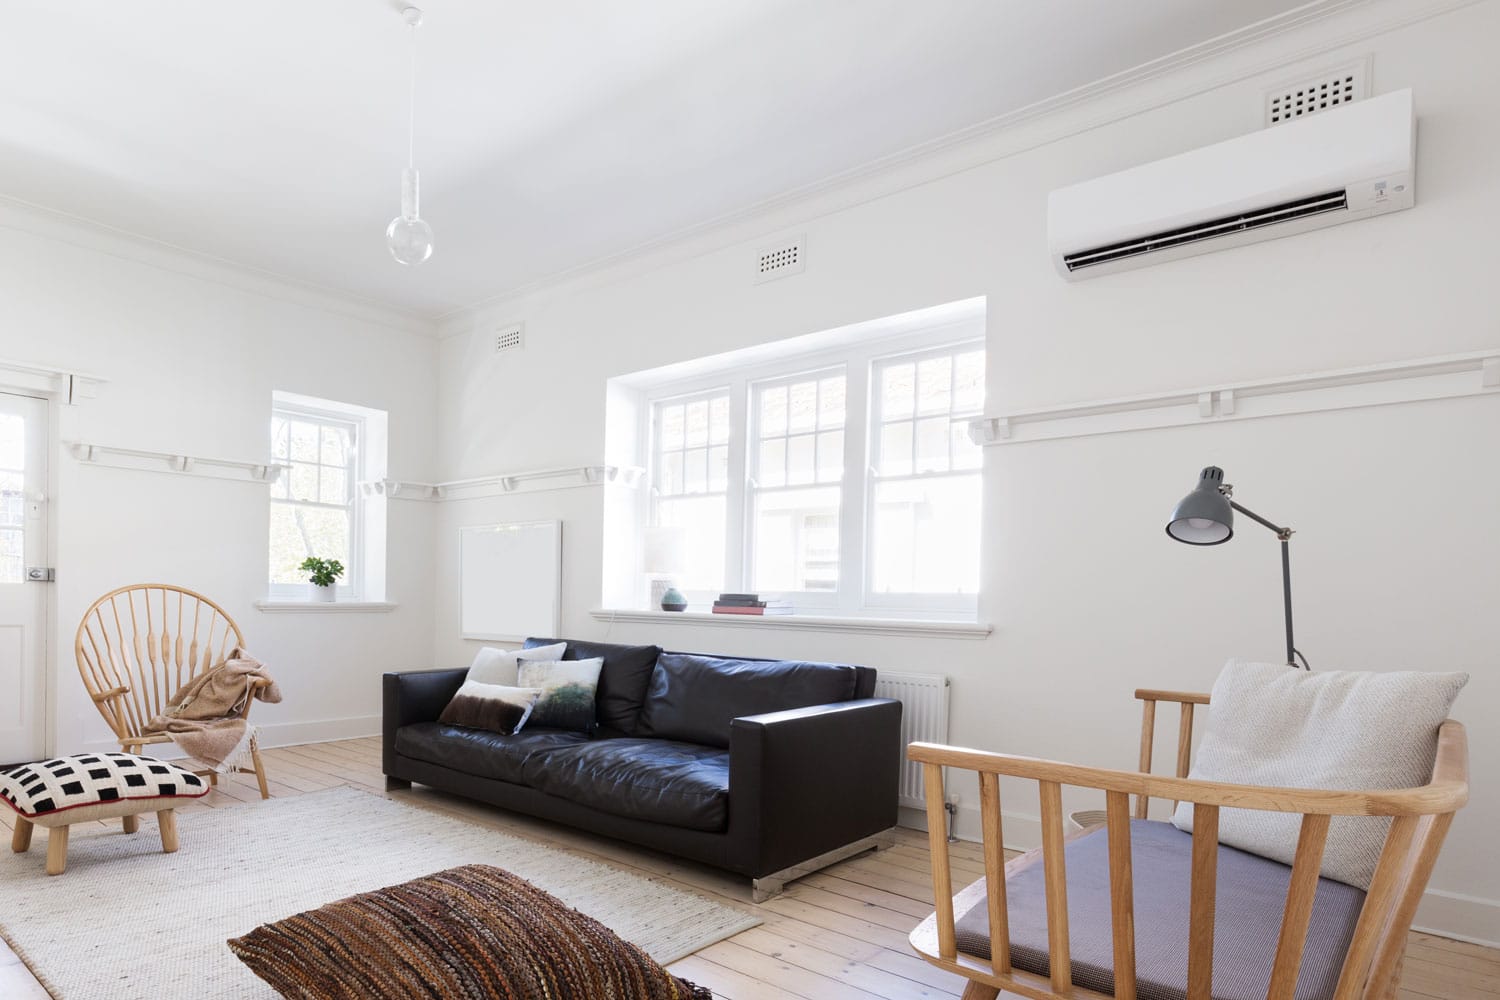 A small and spacious living room with white walls, wooden flooring and gorgeous wooden chairs, What Air Conditioners Work With Coolbot? [And How To Install One]